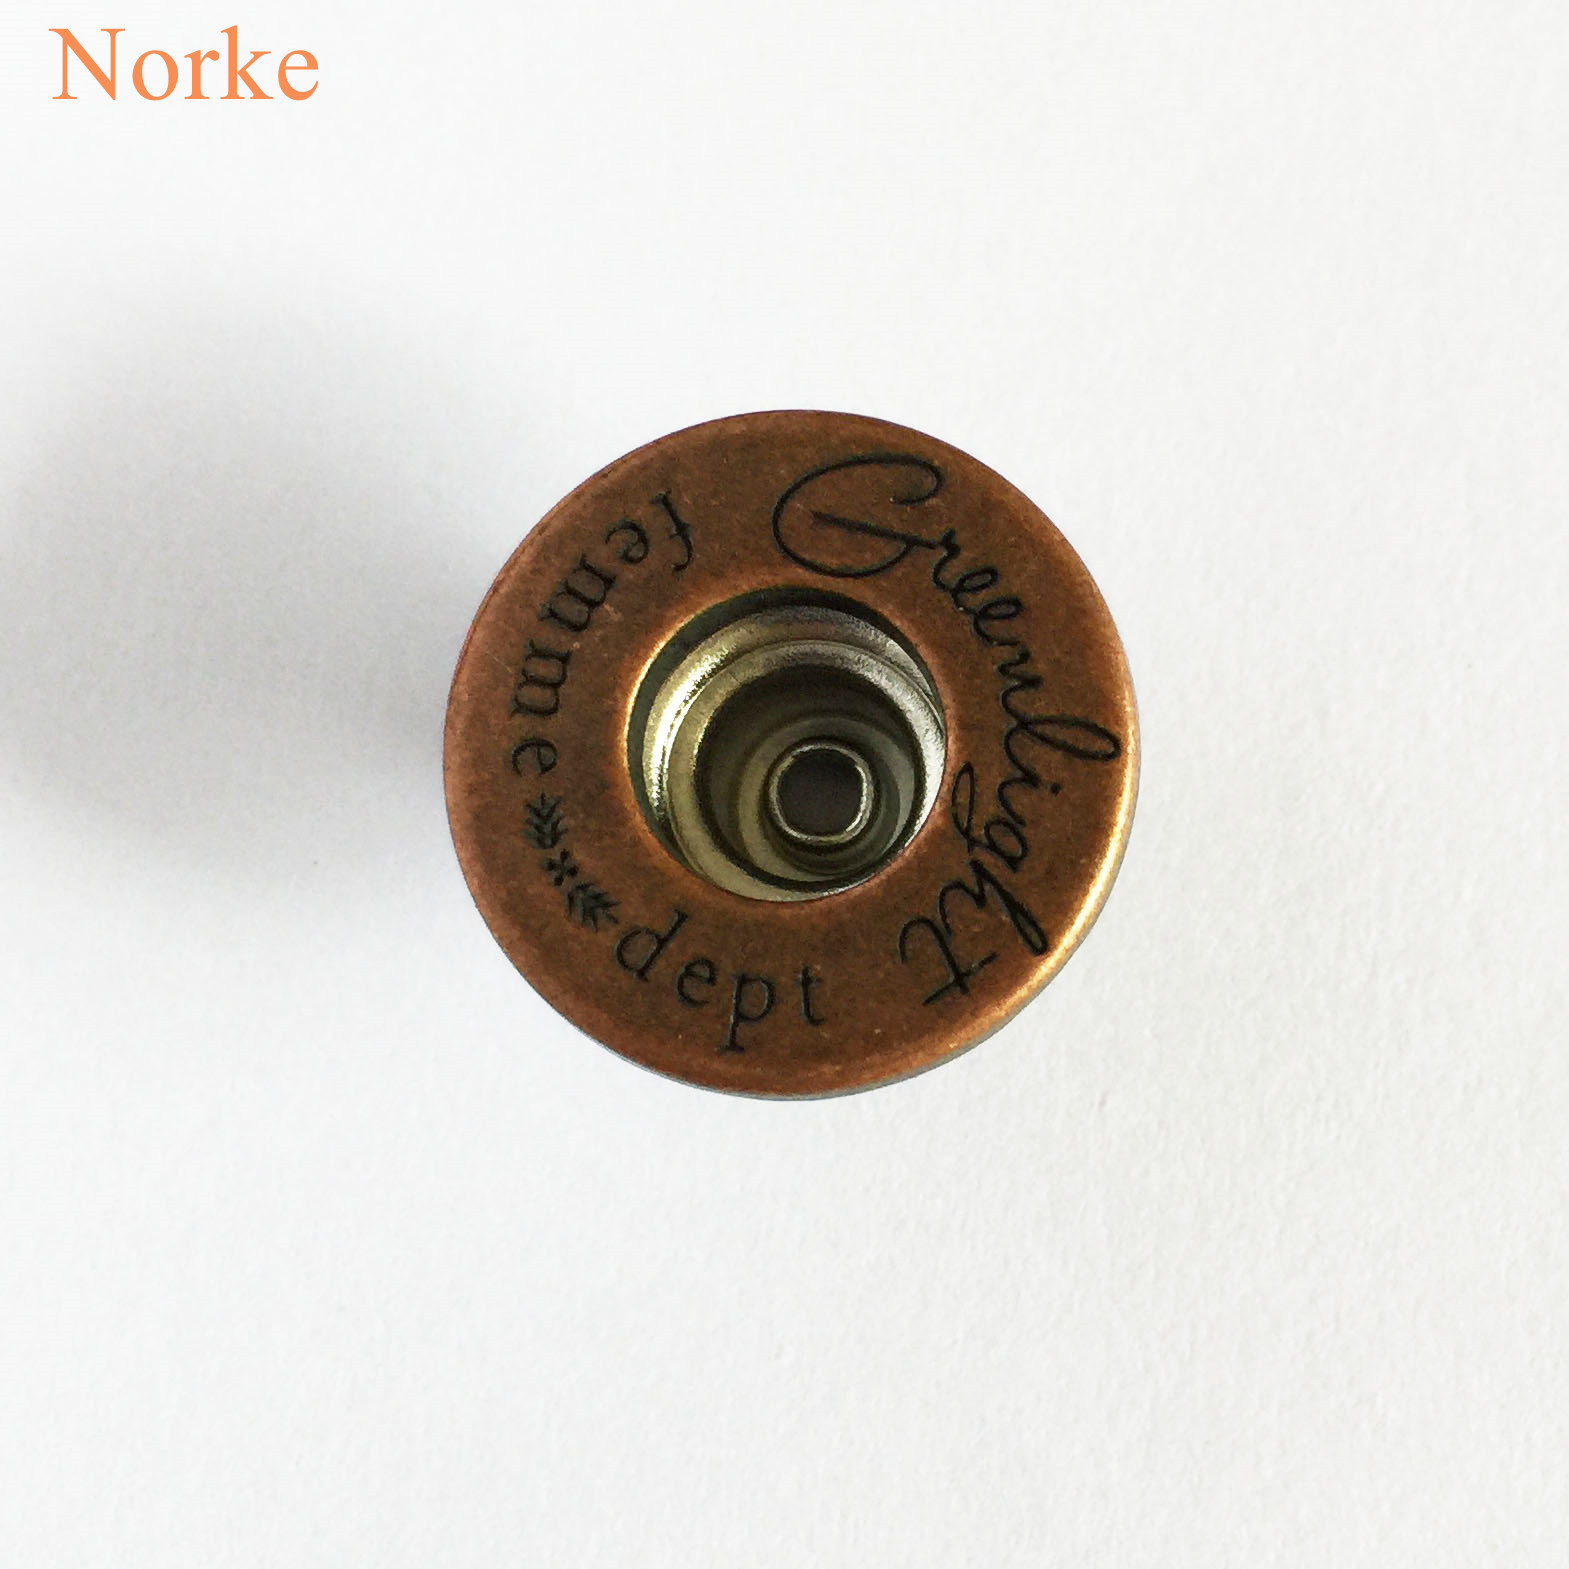 Single Hole Metal Jeans Button with Customized Alloy Cap